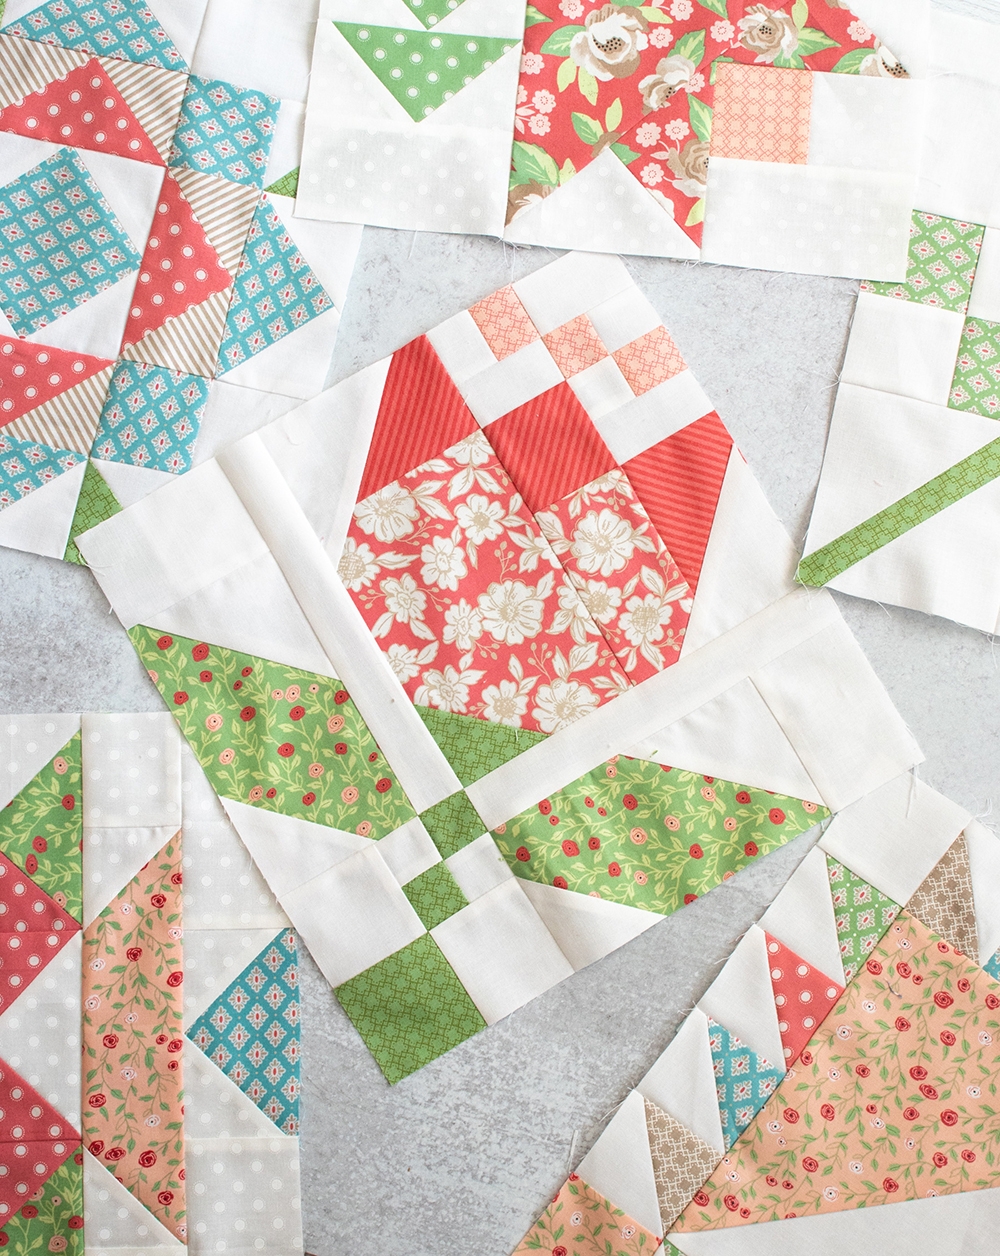 2020 Mystery Designer Block of the Month quilt by Fat Quarter Shop. Flower quilt blocks made in Bloomington fabric by Lella Boutique for Moda Fabrics.